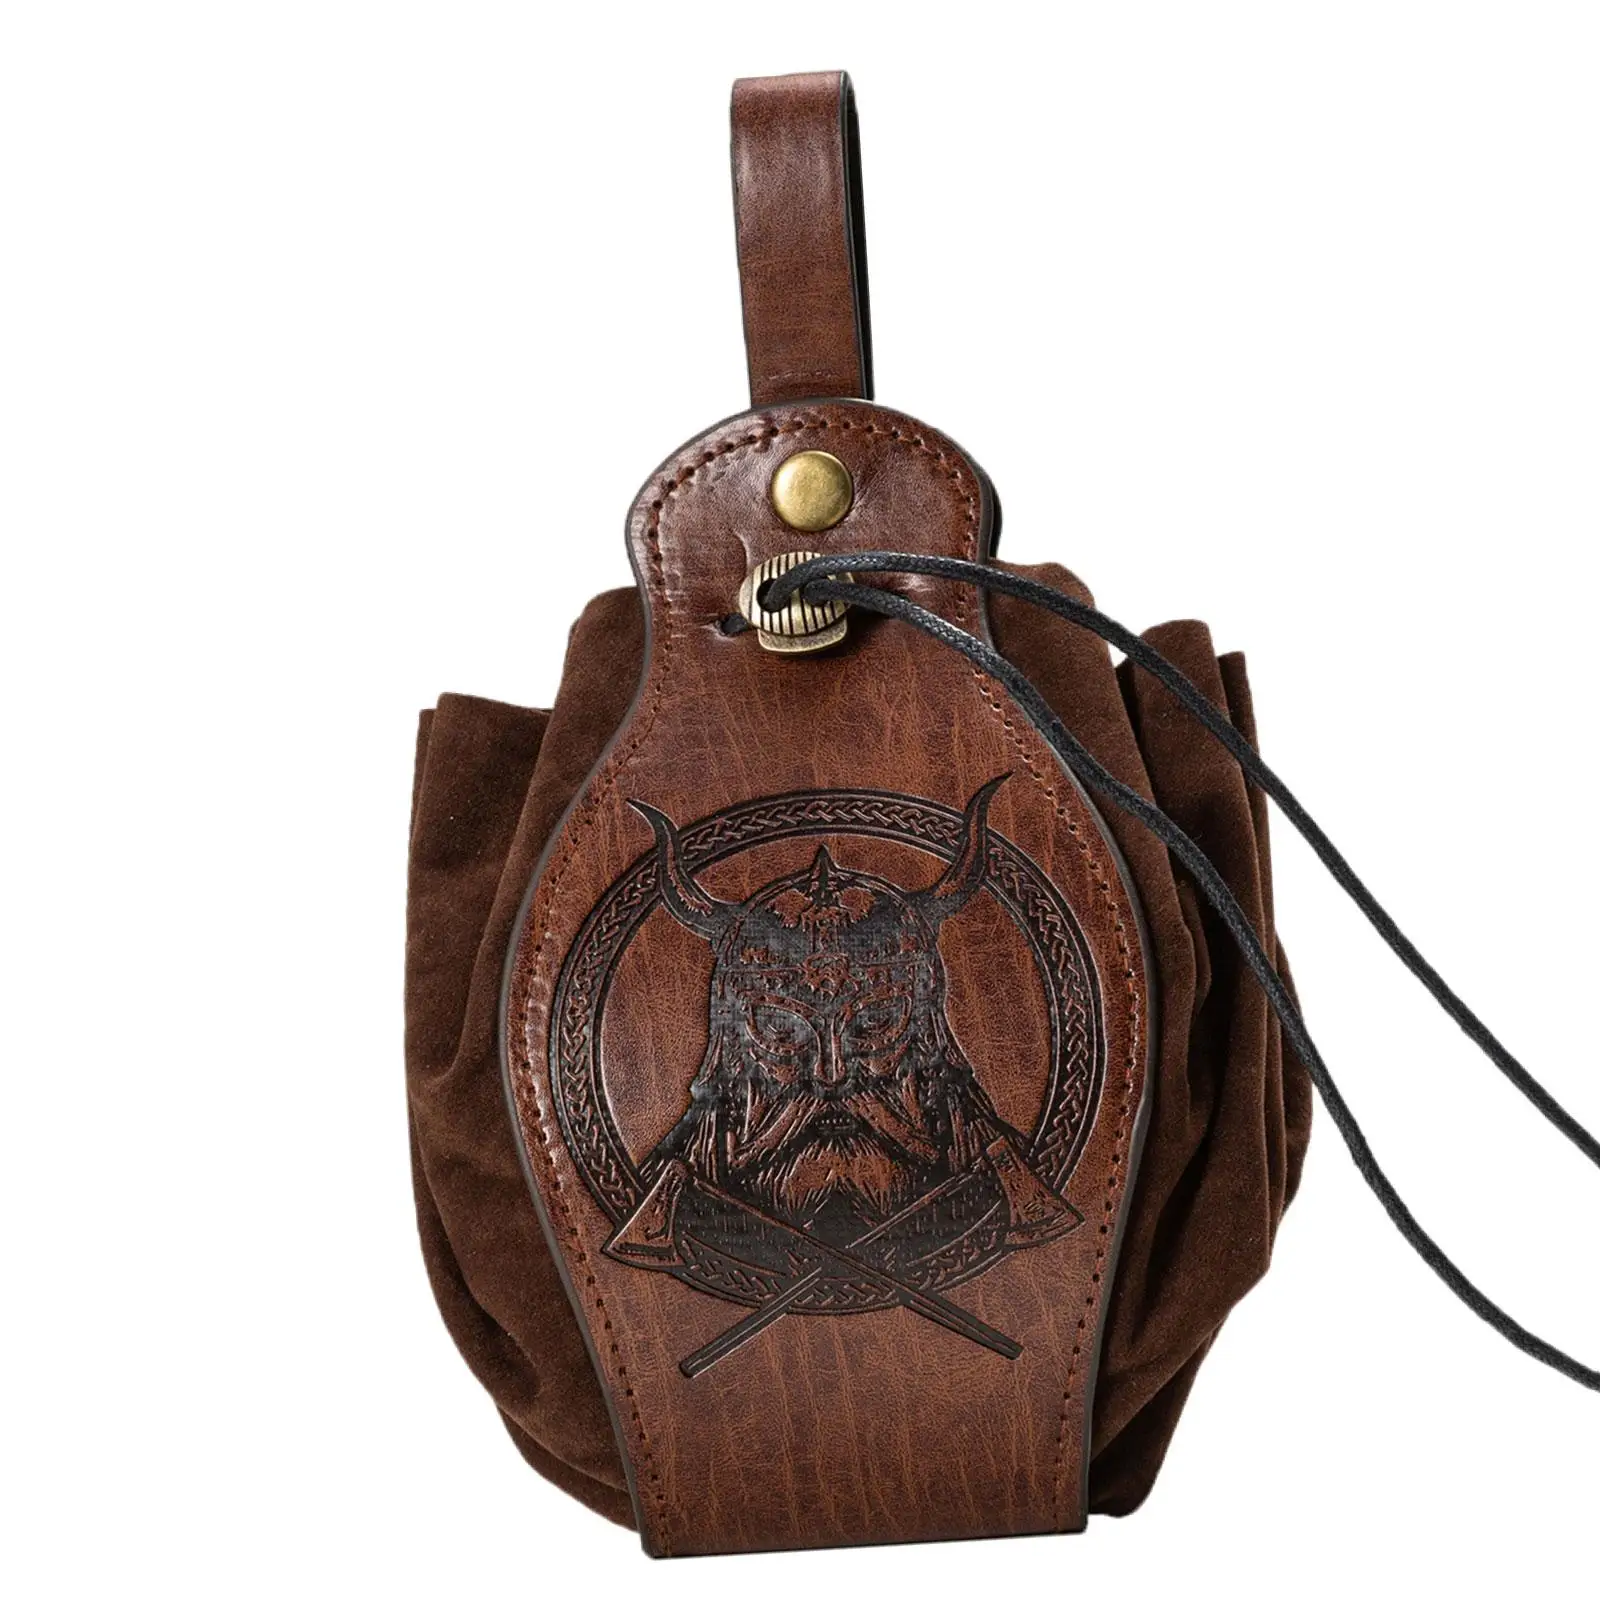 Medieval Drawstring Pouch PU Leather Bum Bags Casual Dice Bag Waist Bag Fanny Pack for Walking Party Camping Trekking Running